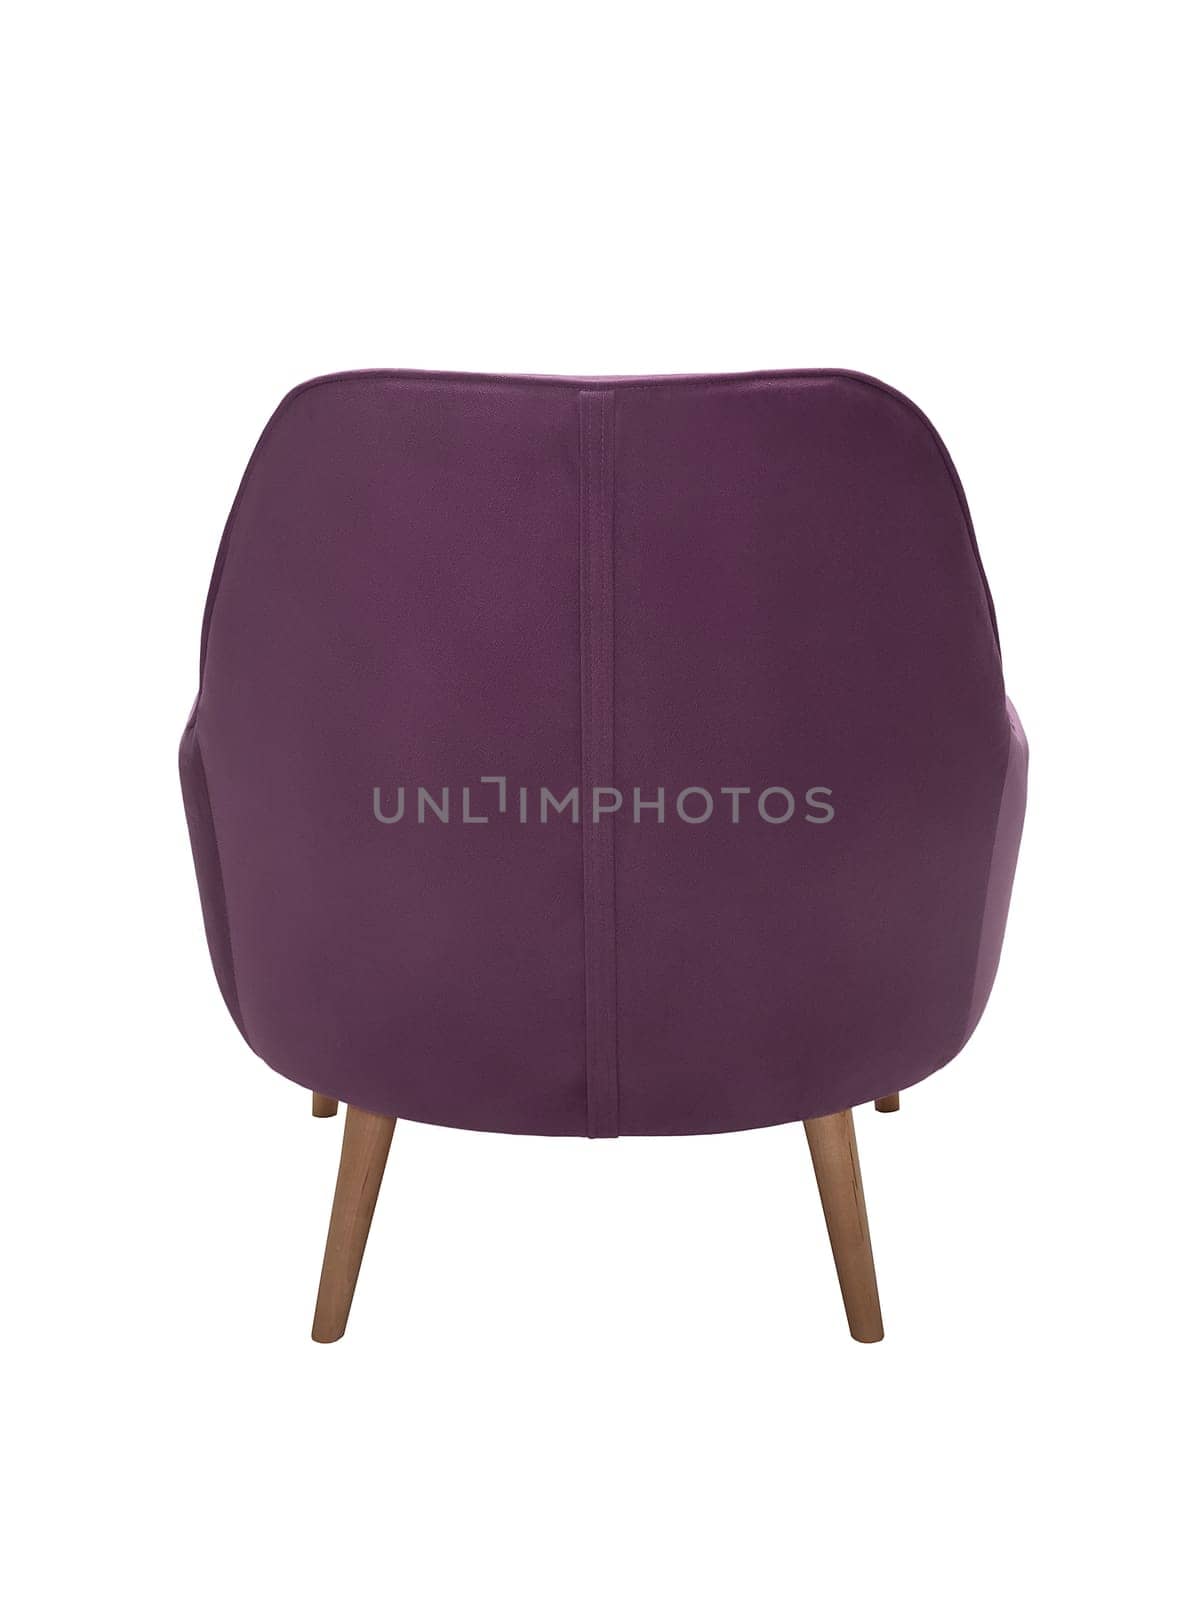 modern purple fabric armchair with wooden legs isolated on white background, back view